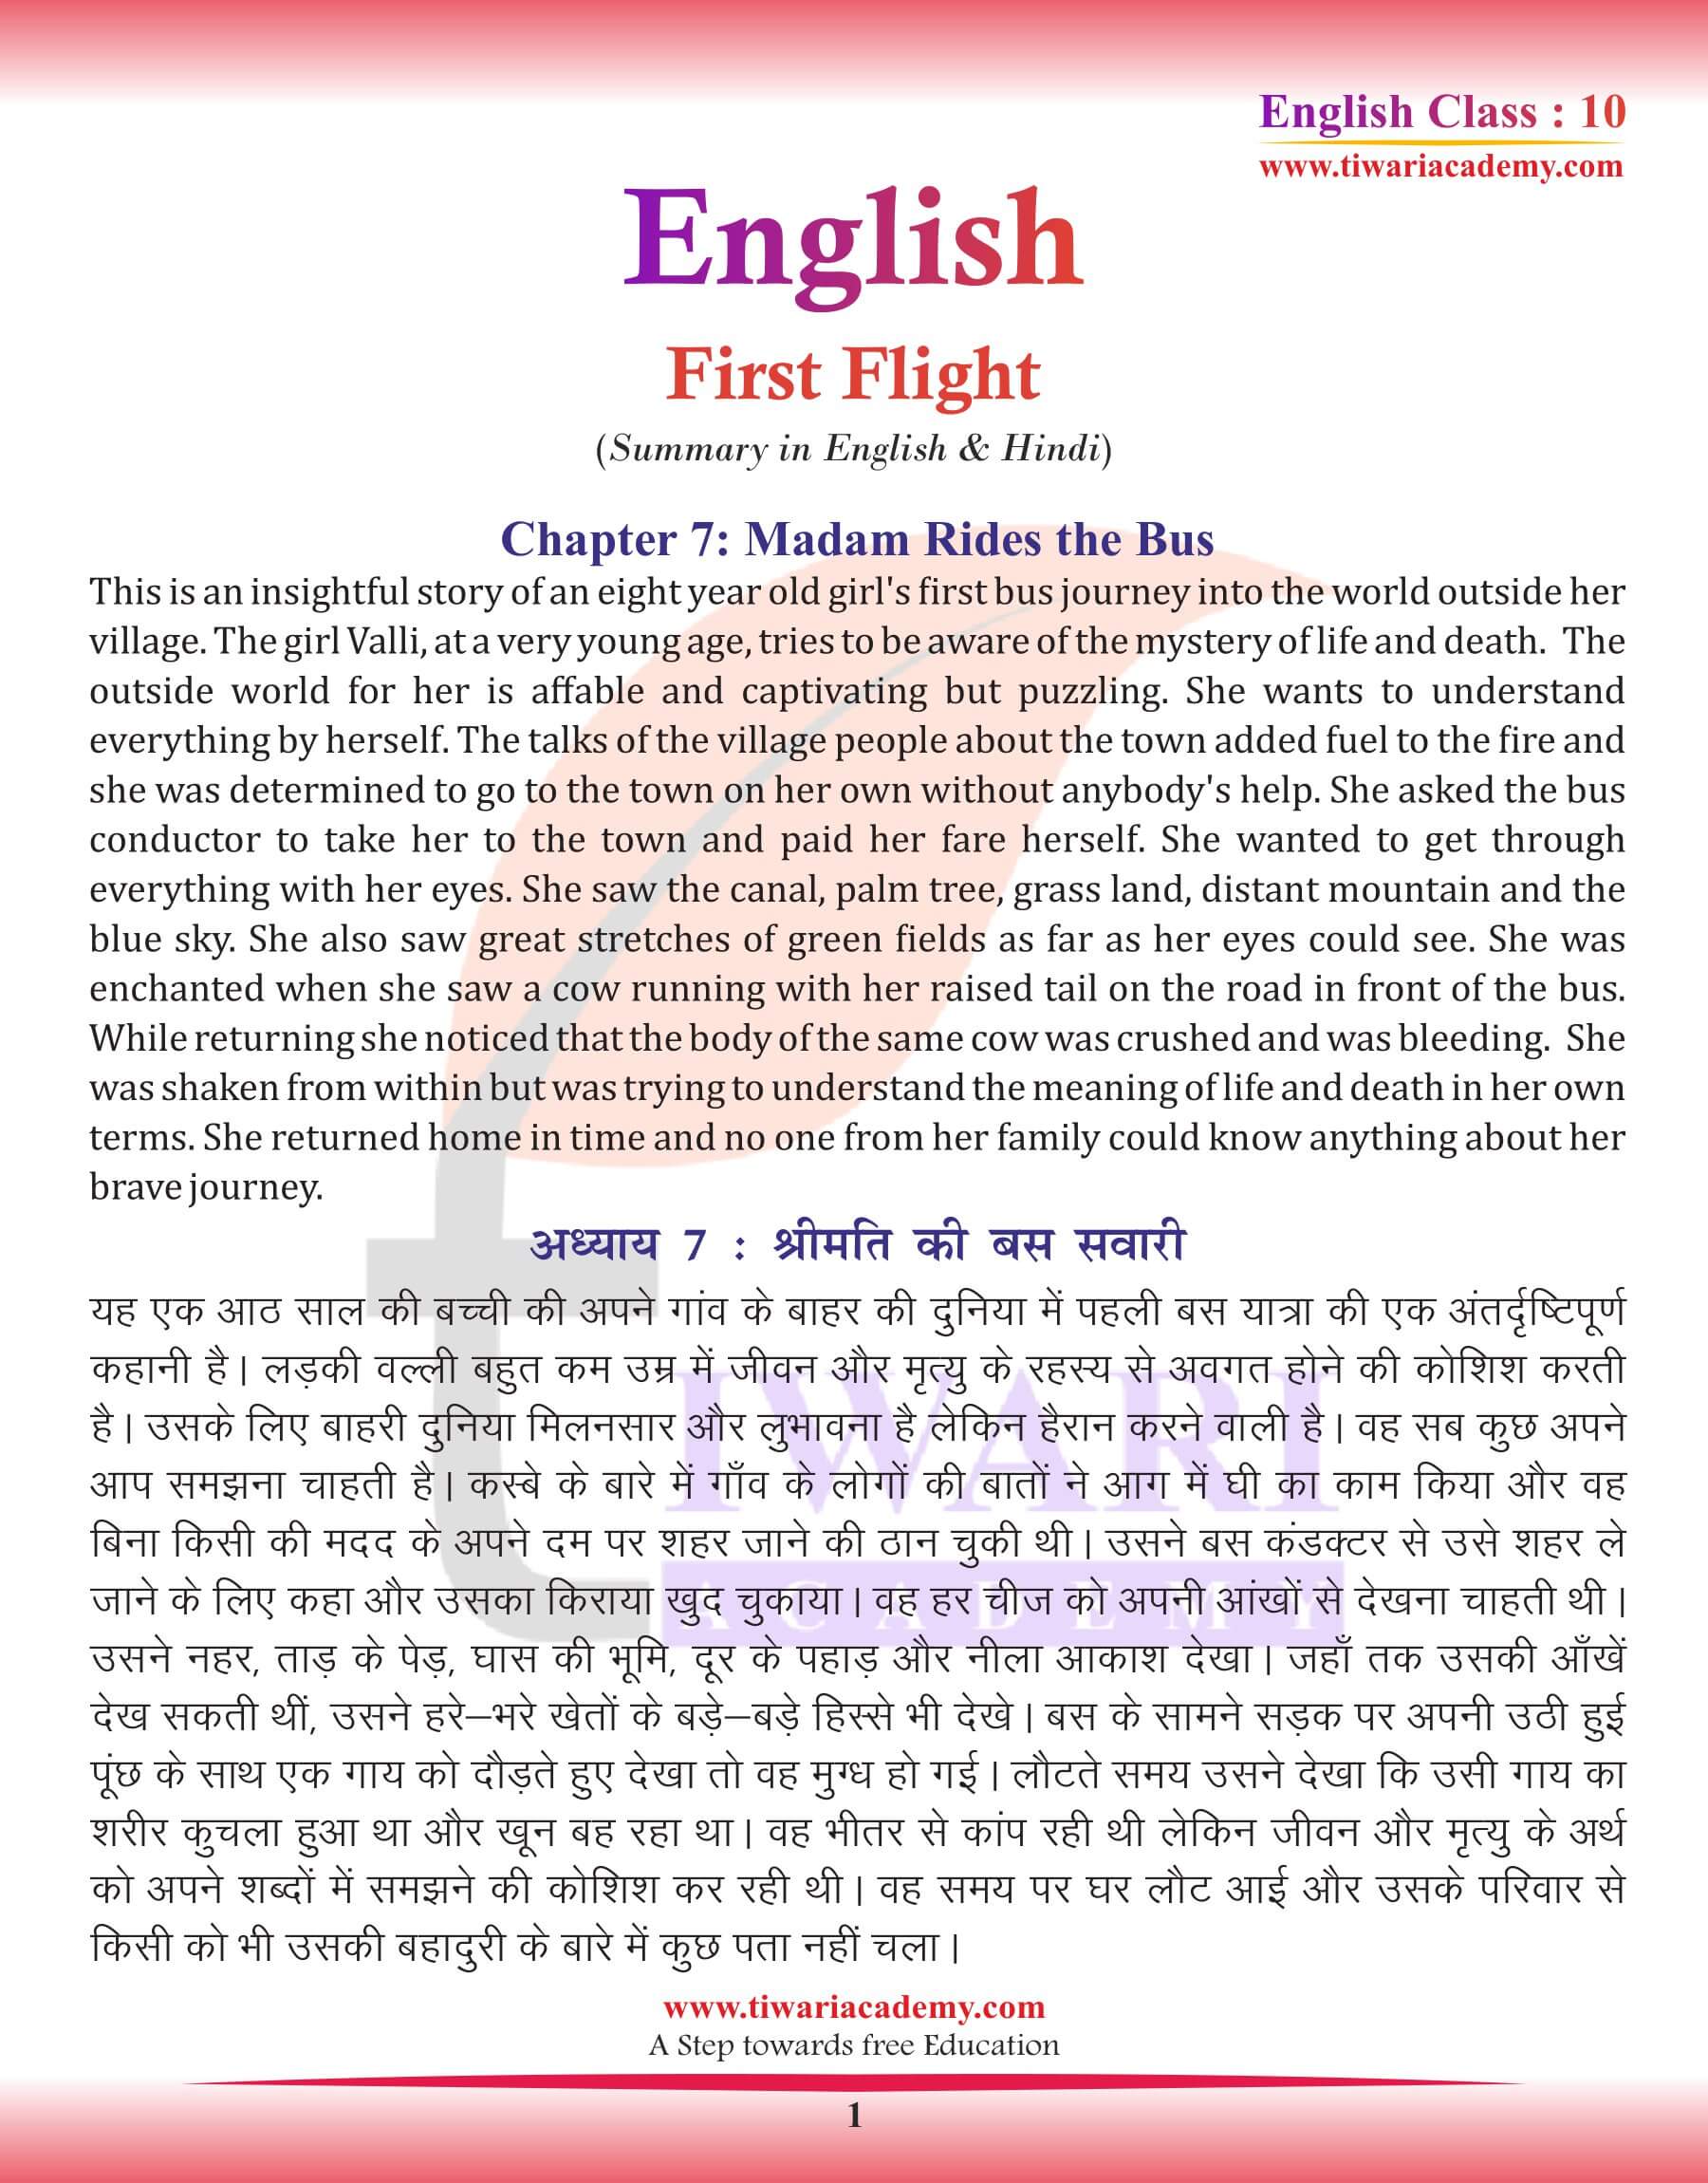 Class 10 English Chapter 7 Summery in Hindi and English